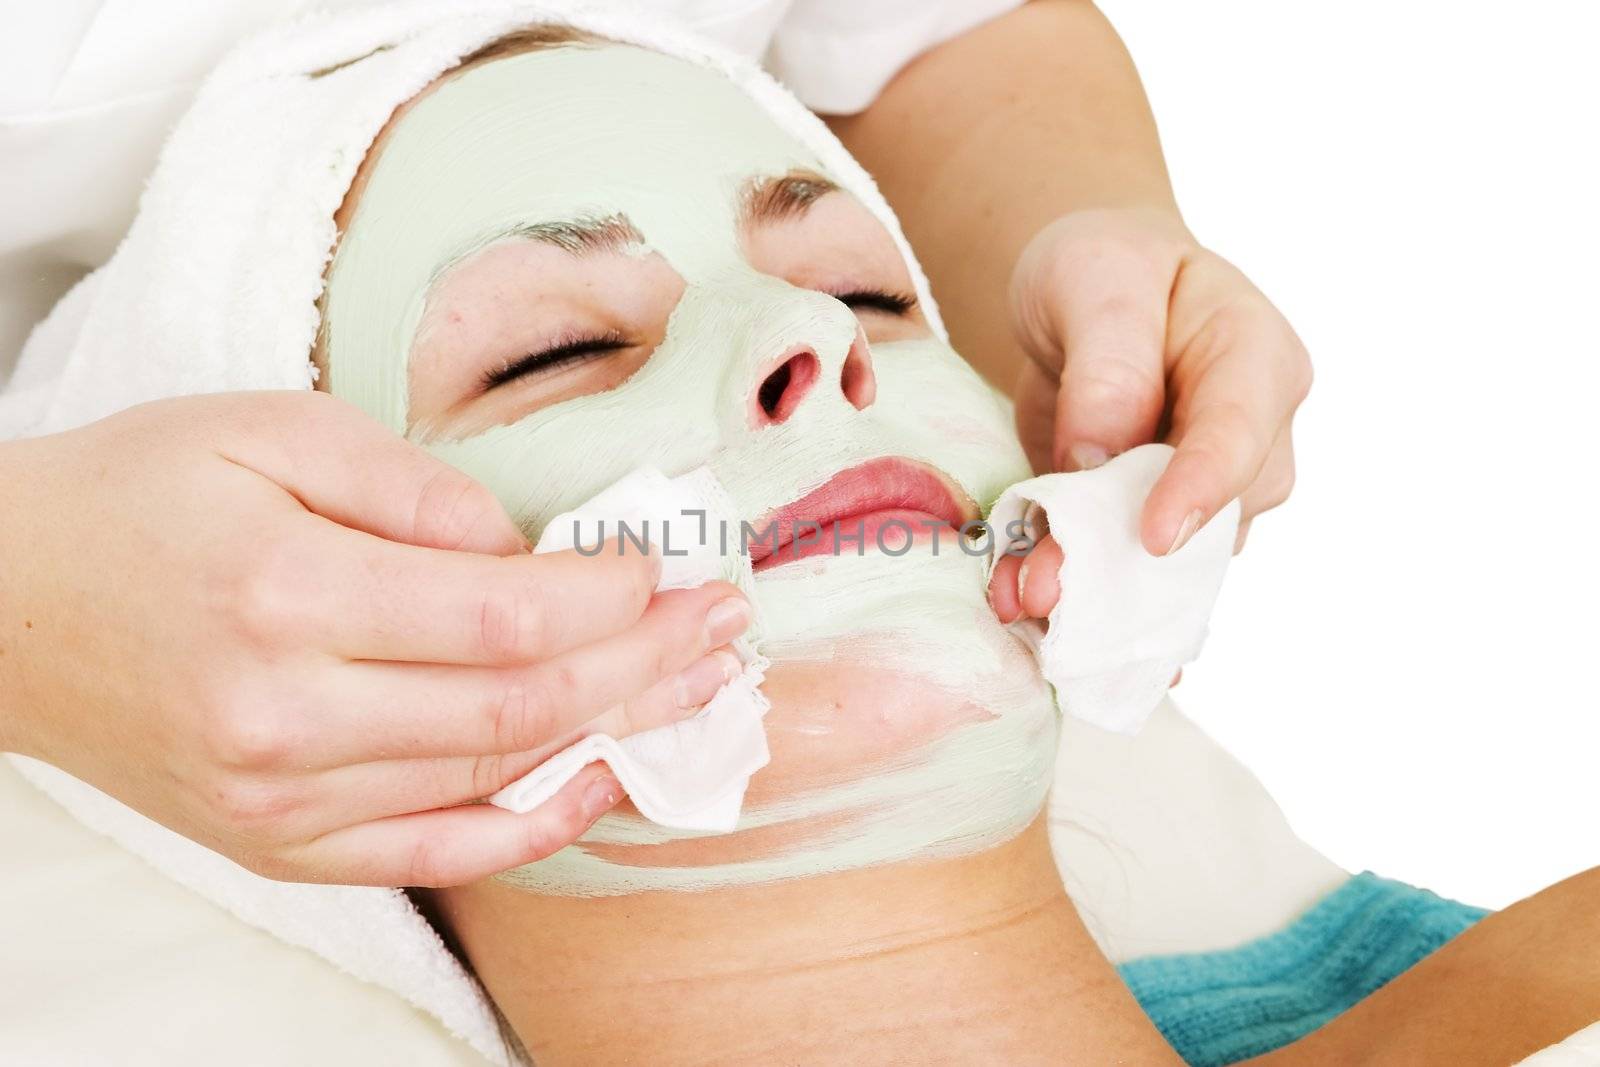 Detail of a facial mask treatment being wiped off the face.